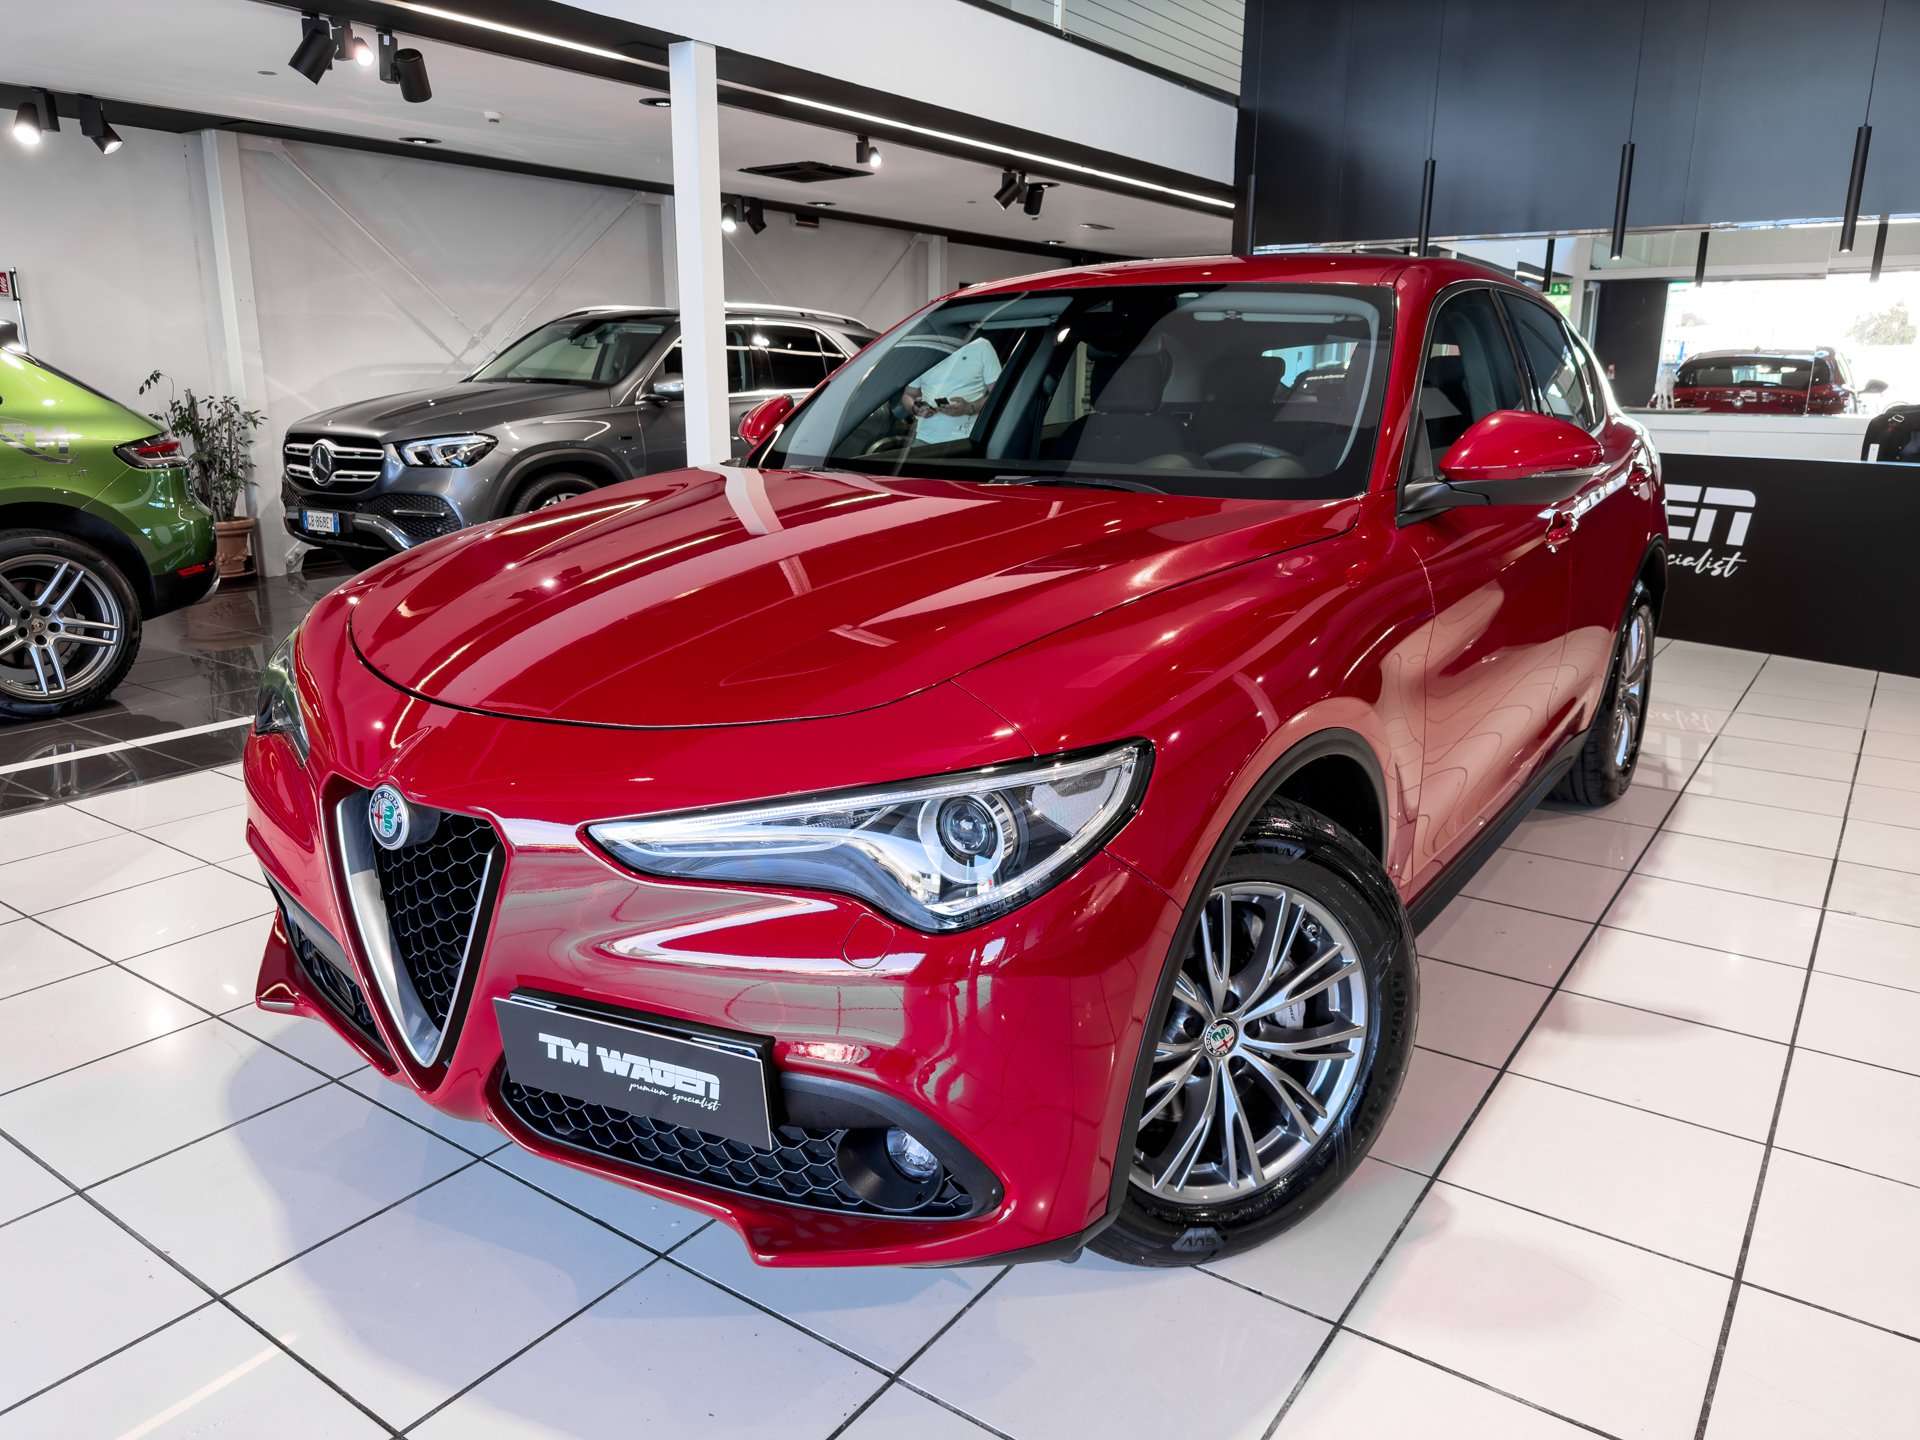 Alfa Romeo Stelvio Off-Road/Pick-up in Red used in Firenze - FI for € 22,900.-